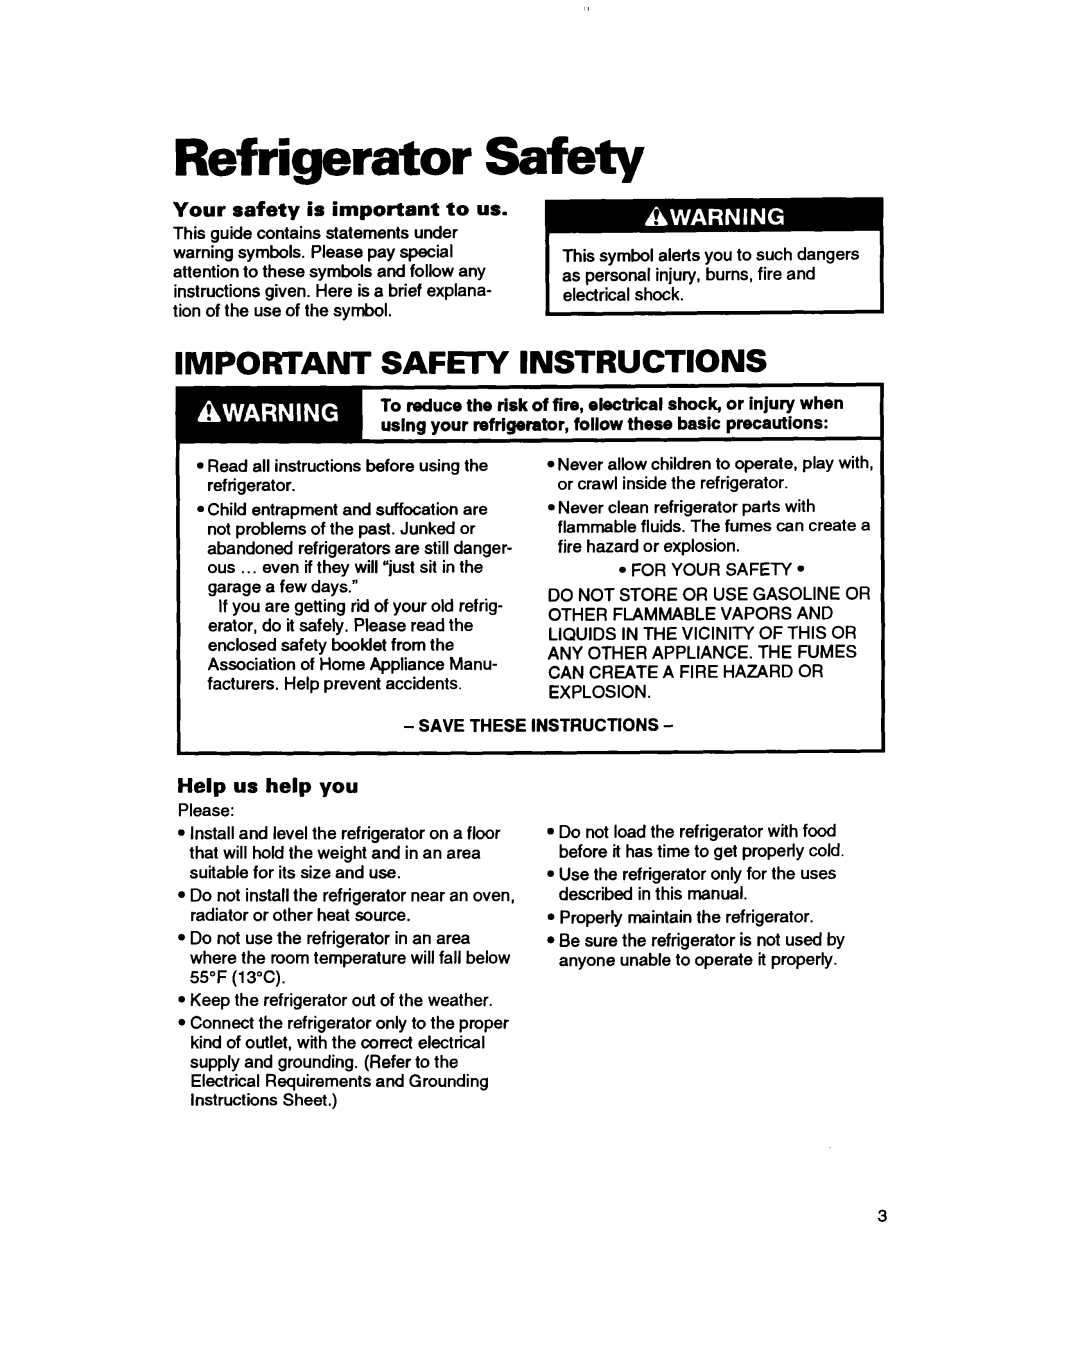 Whirlpool RTl4VK Refrigerator Safety, Important Safeiy Instructions, Your safety is important to us, Help us help you 